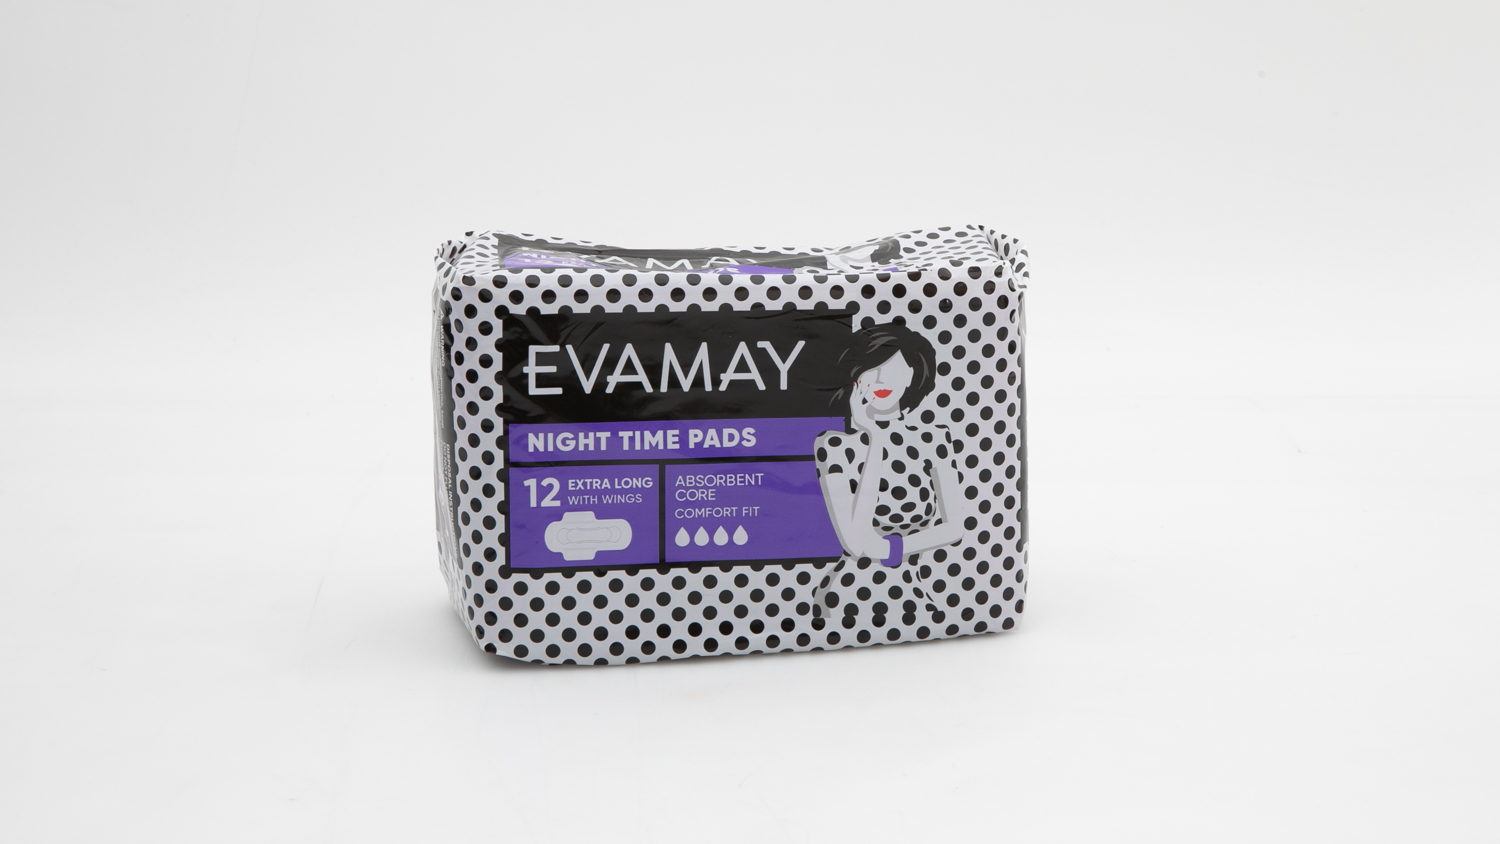 Woolworths Evamay Night Time Pads with wings carousel image